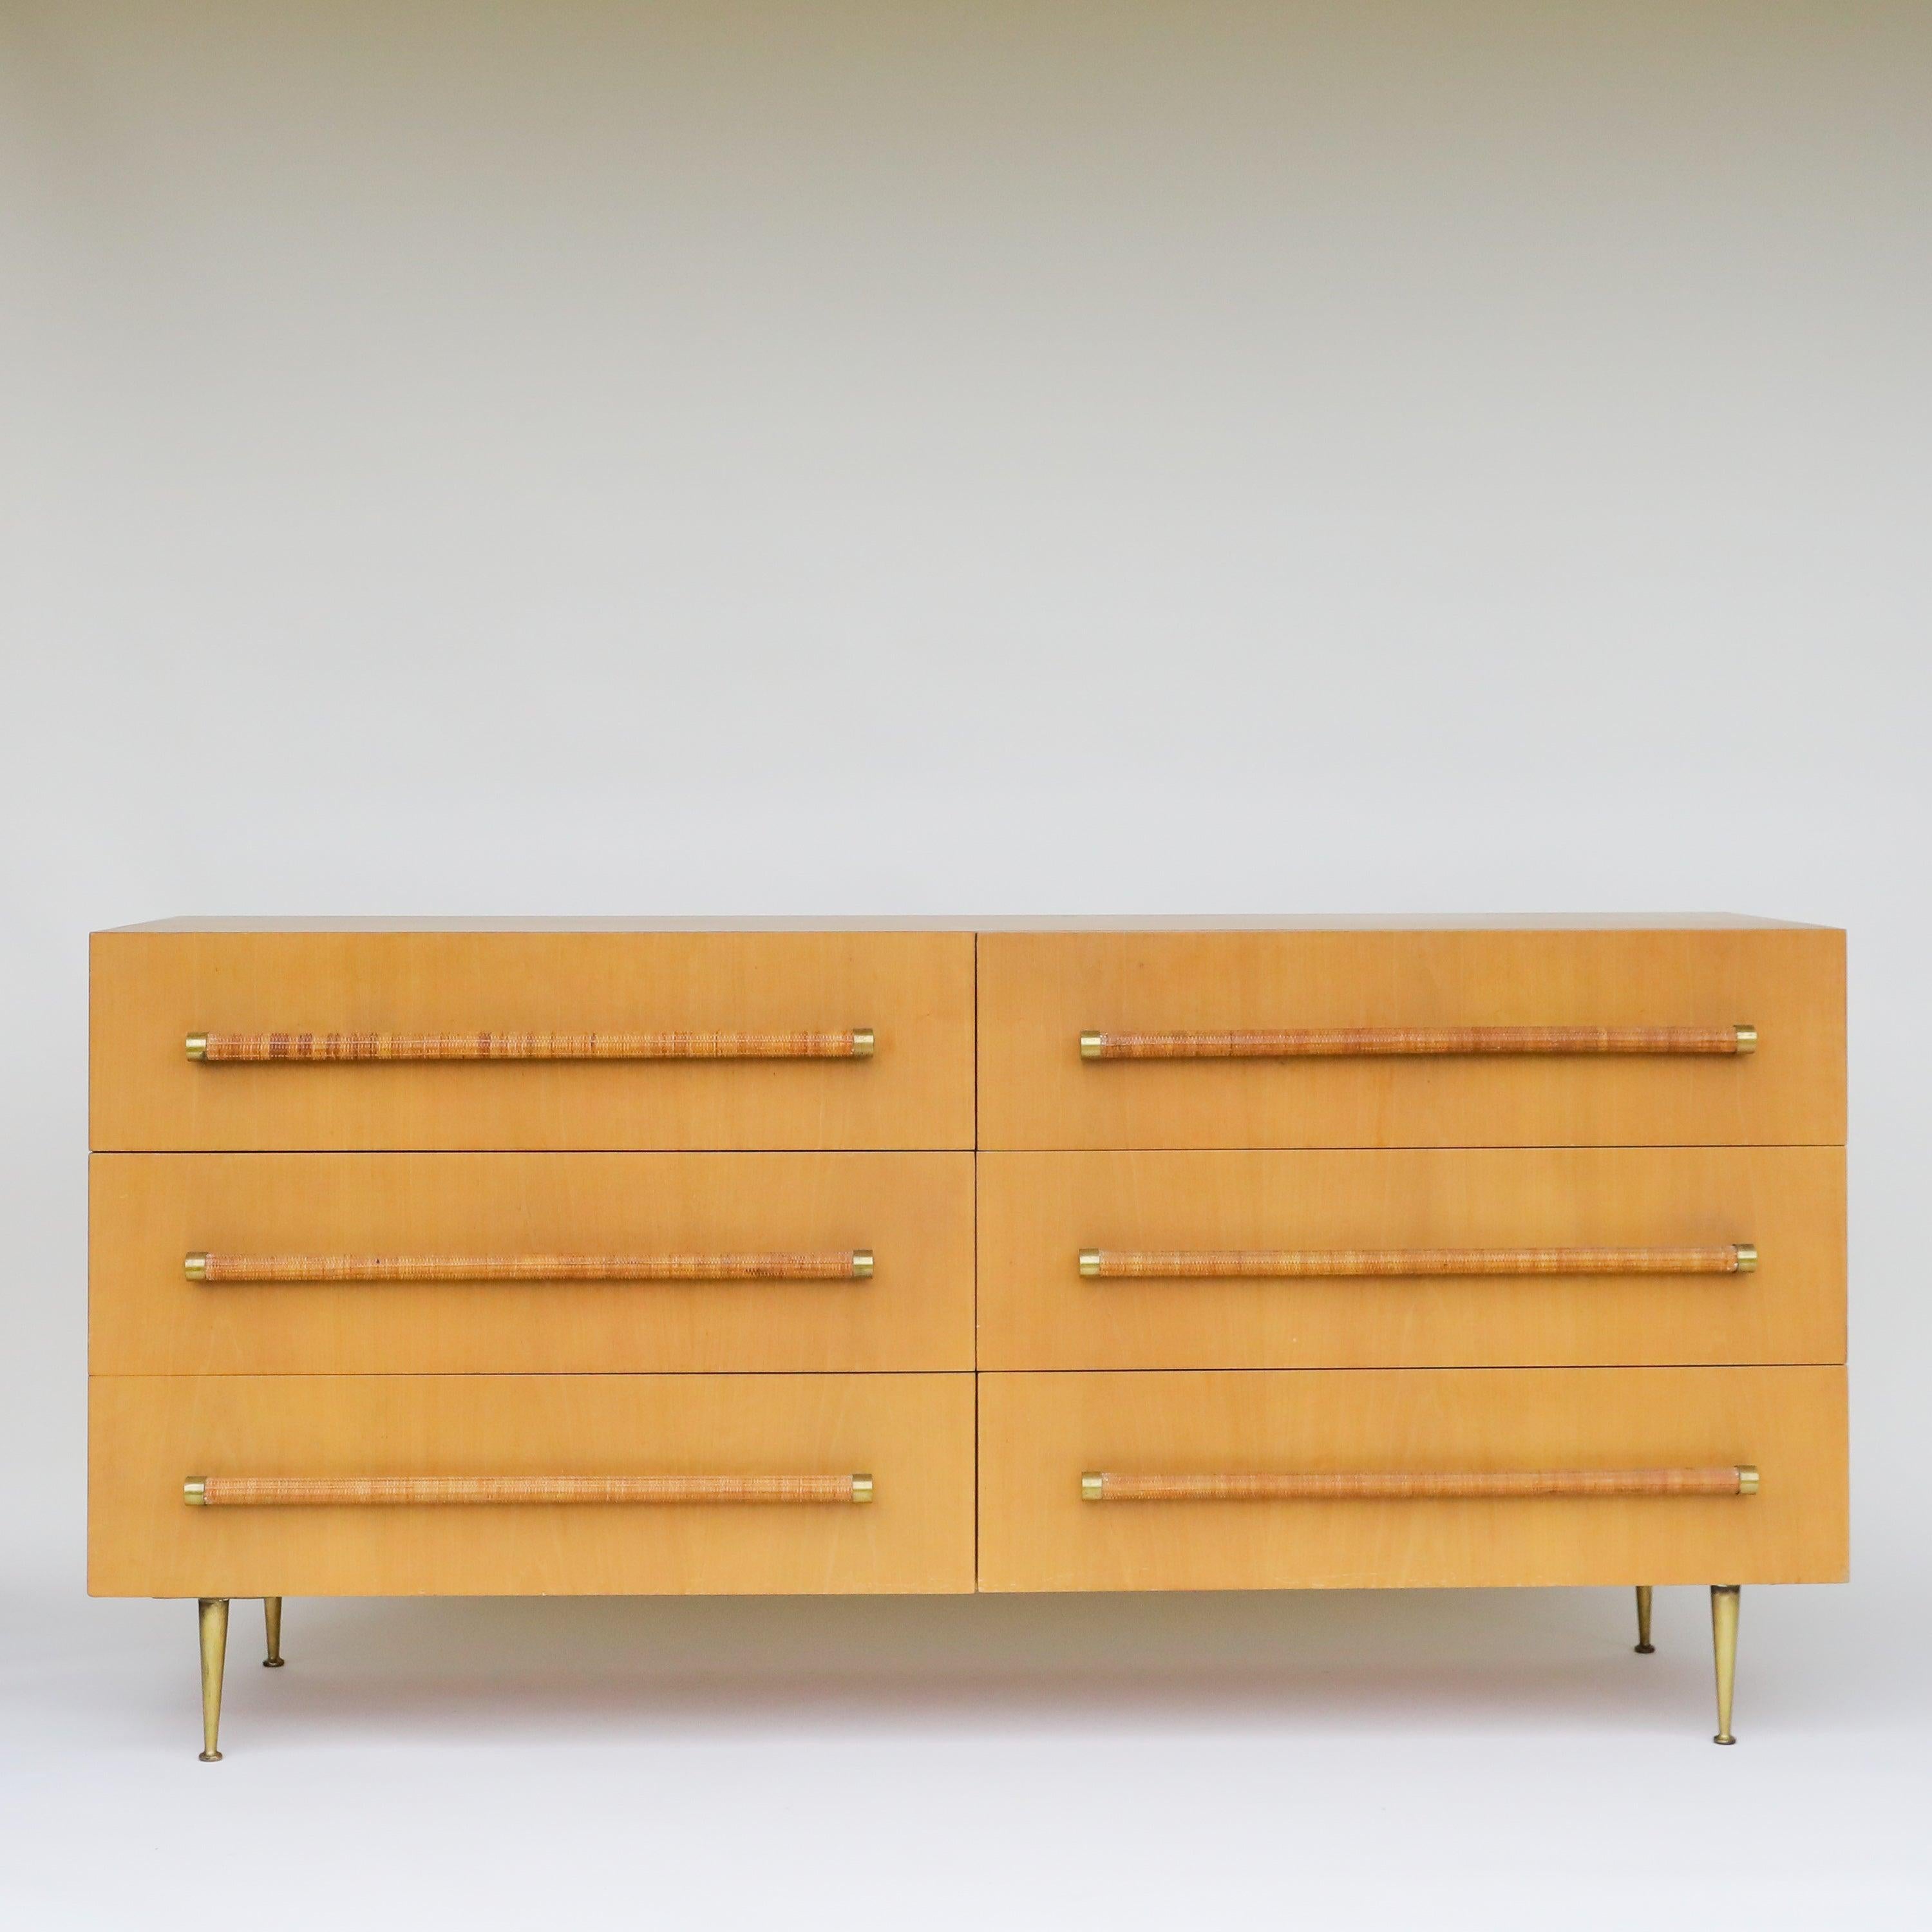 

A  stylish modern dresser designed by British-born architect T.H. Robsjohn Gibbings for Widdicomb in the United States, circa 1950s. This striking design features a walnut wood case with six drawers and solid brass legs perfectly complementing the